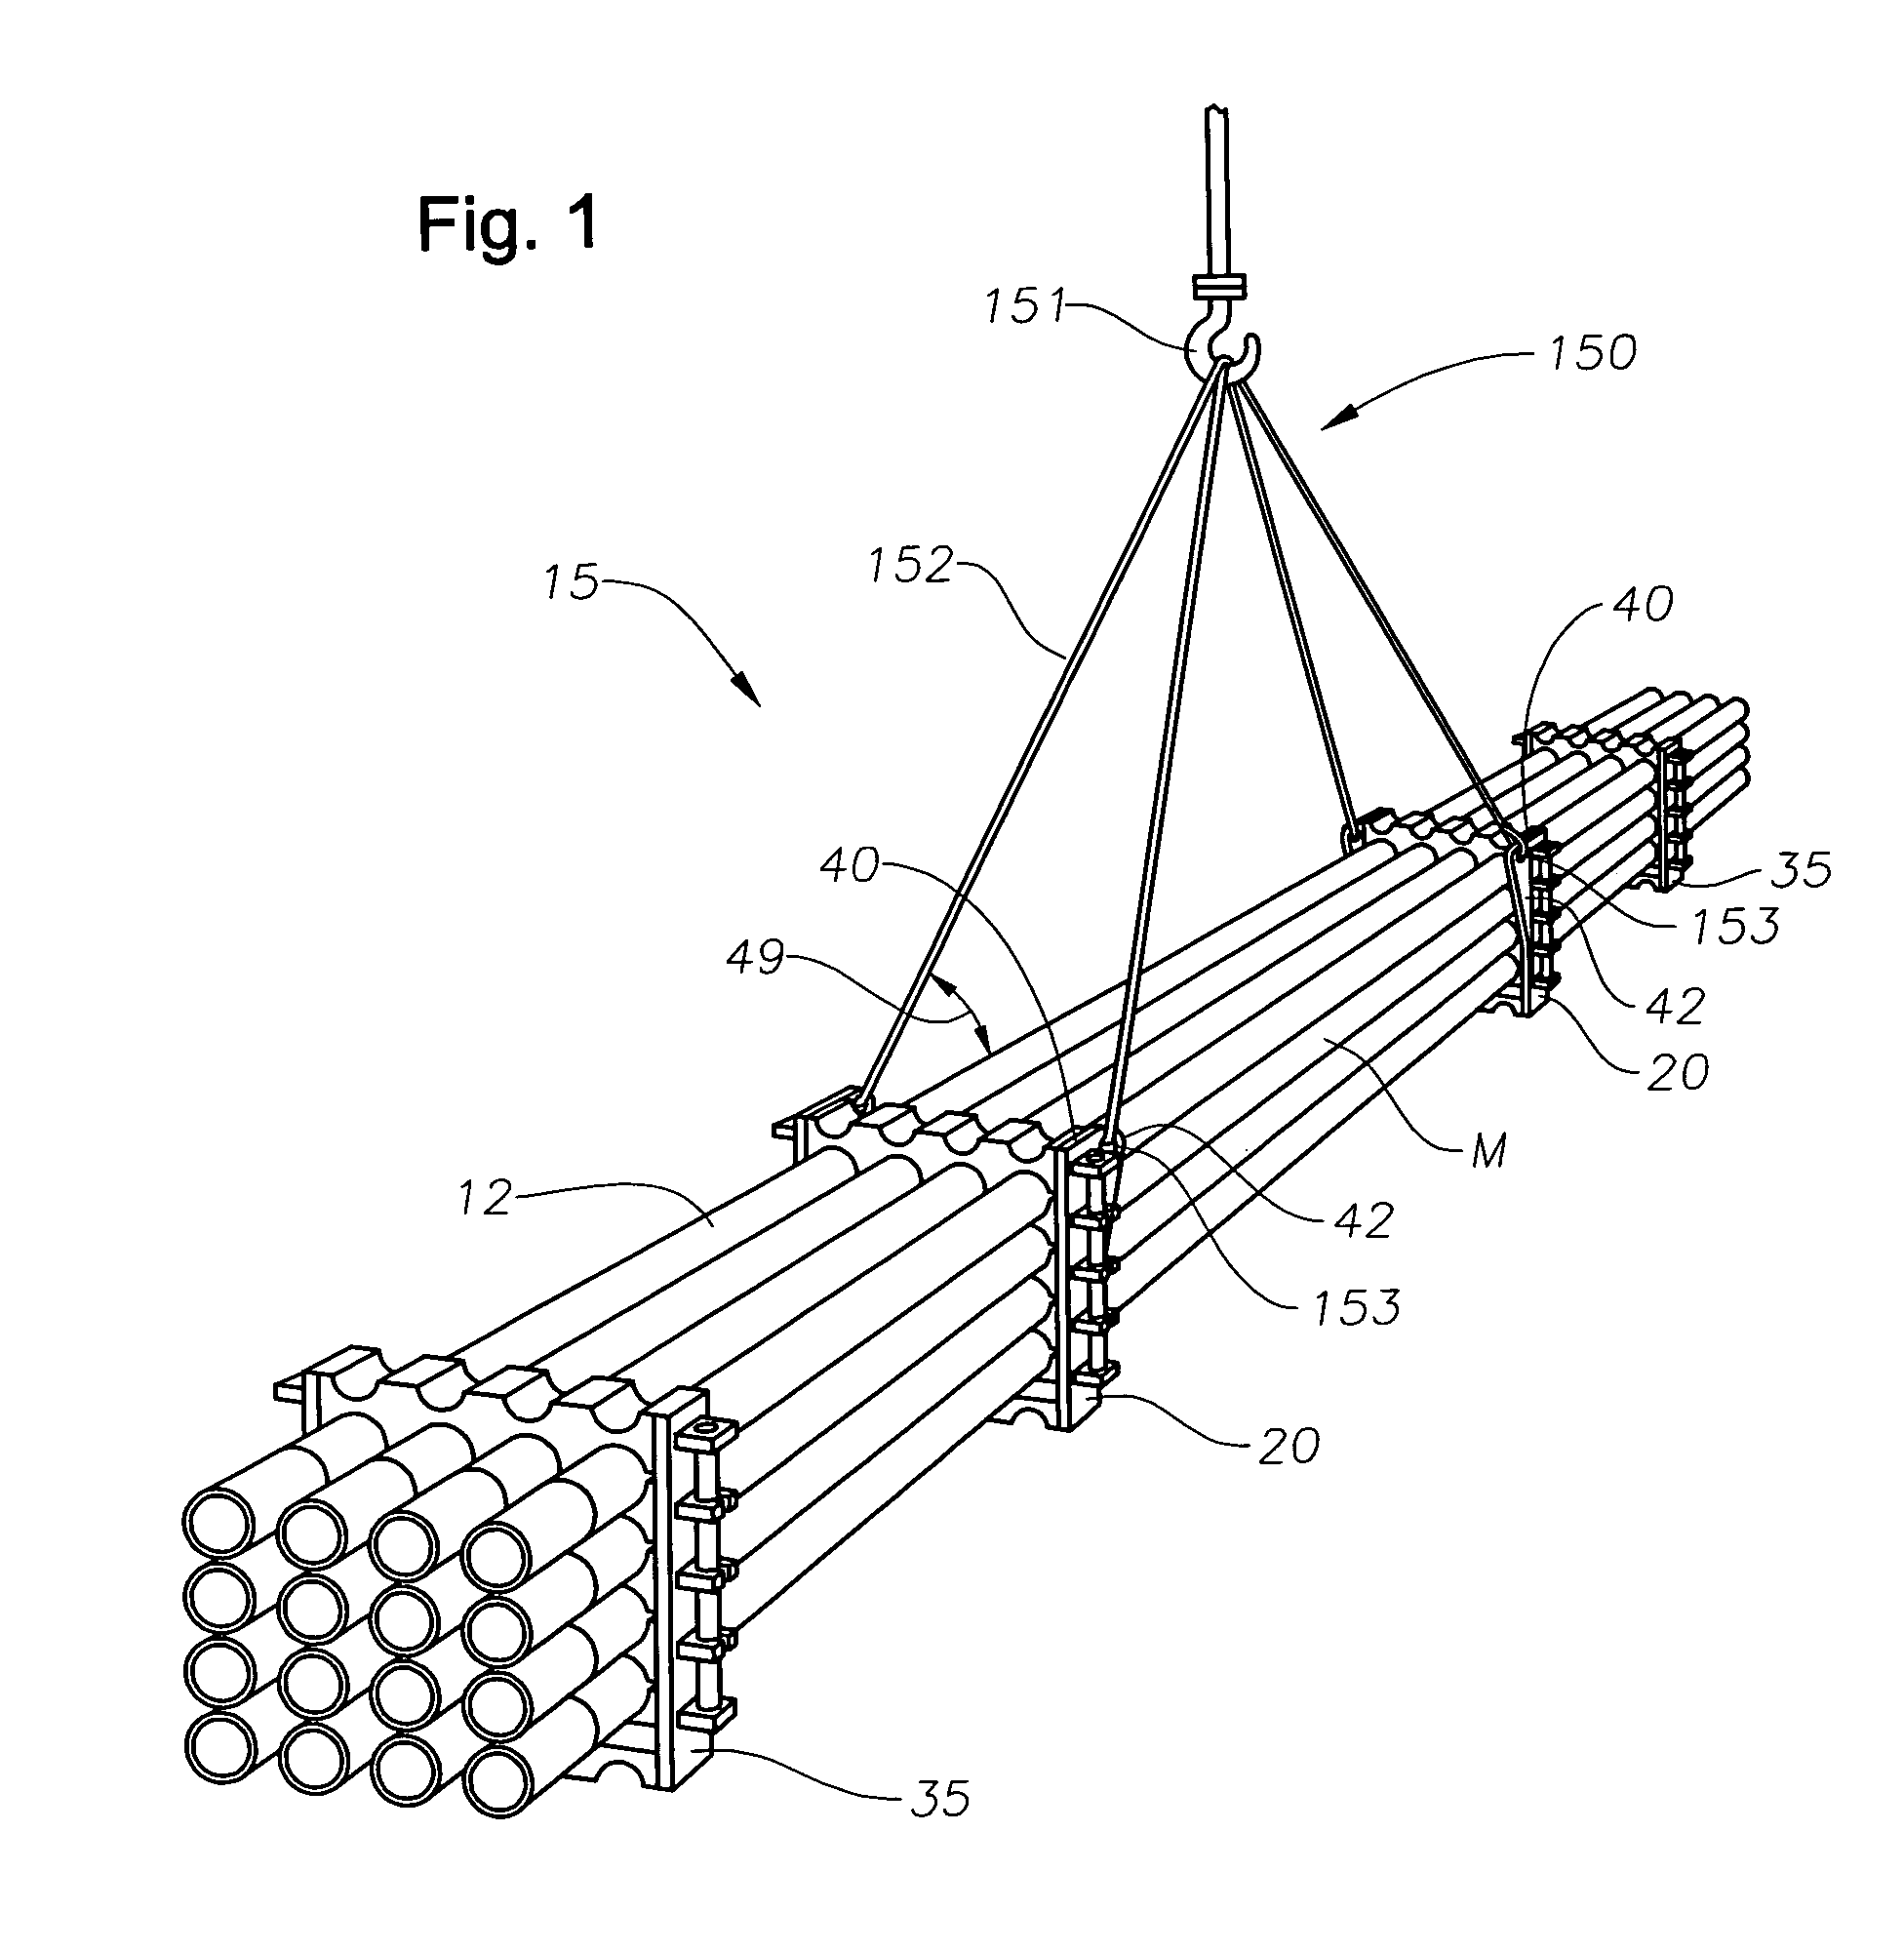 Apparatus for shipping and storing elongated members